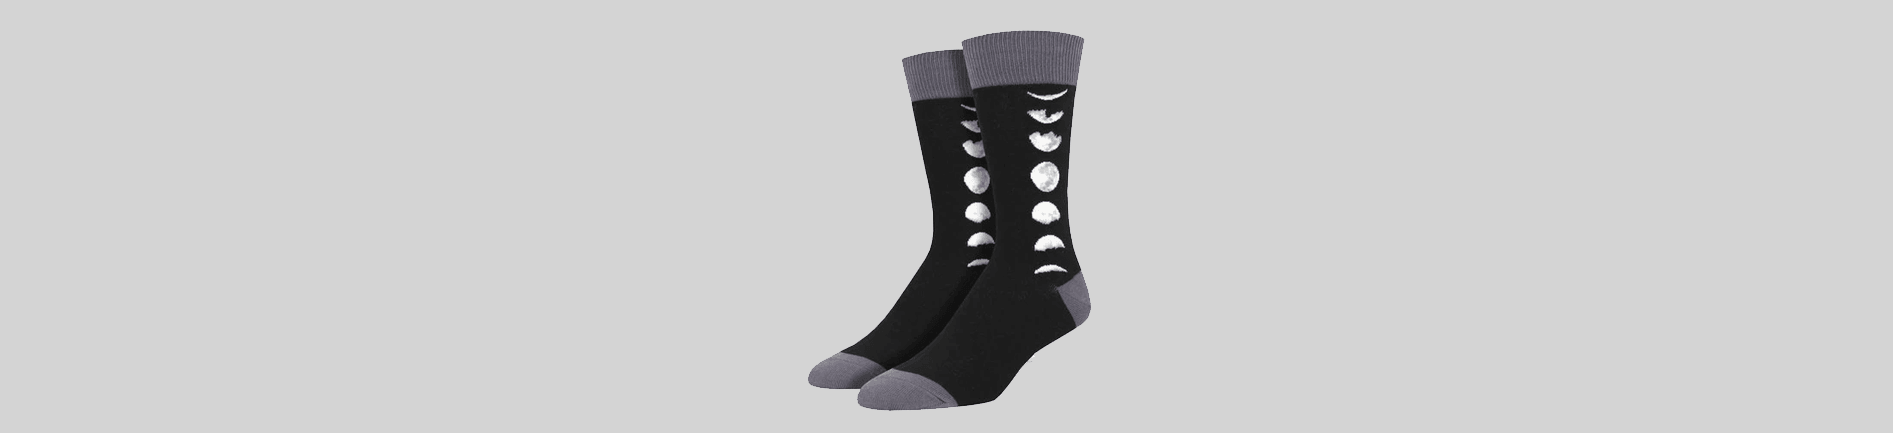 Shop by Collection - Socks - hotRAGS.com